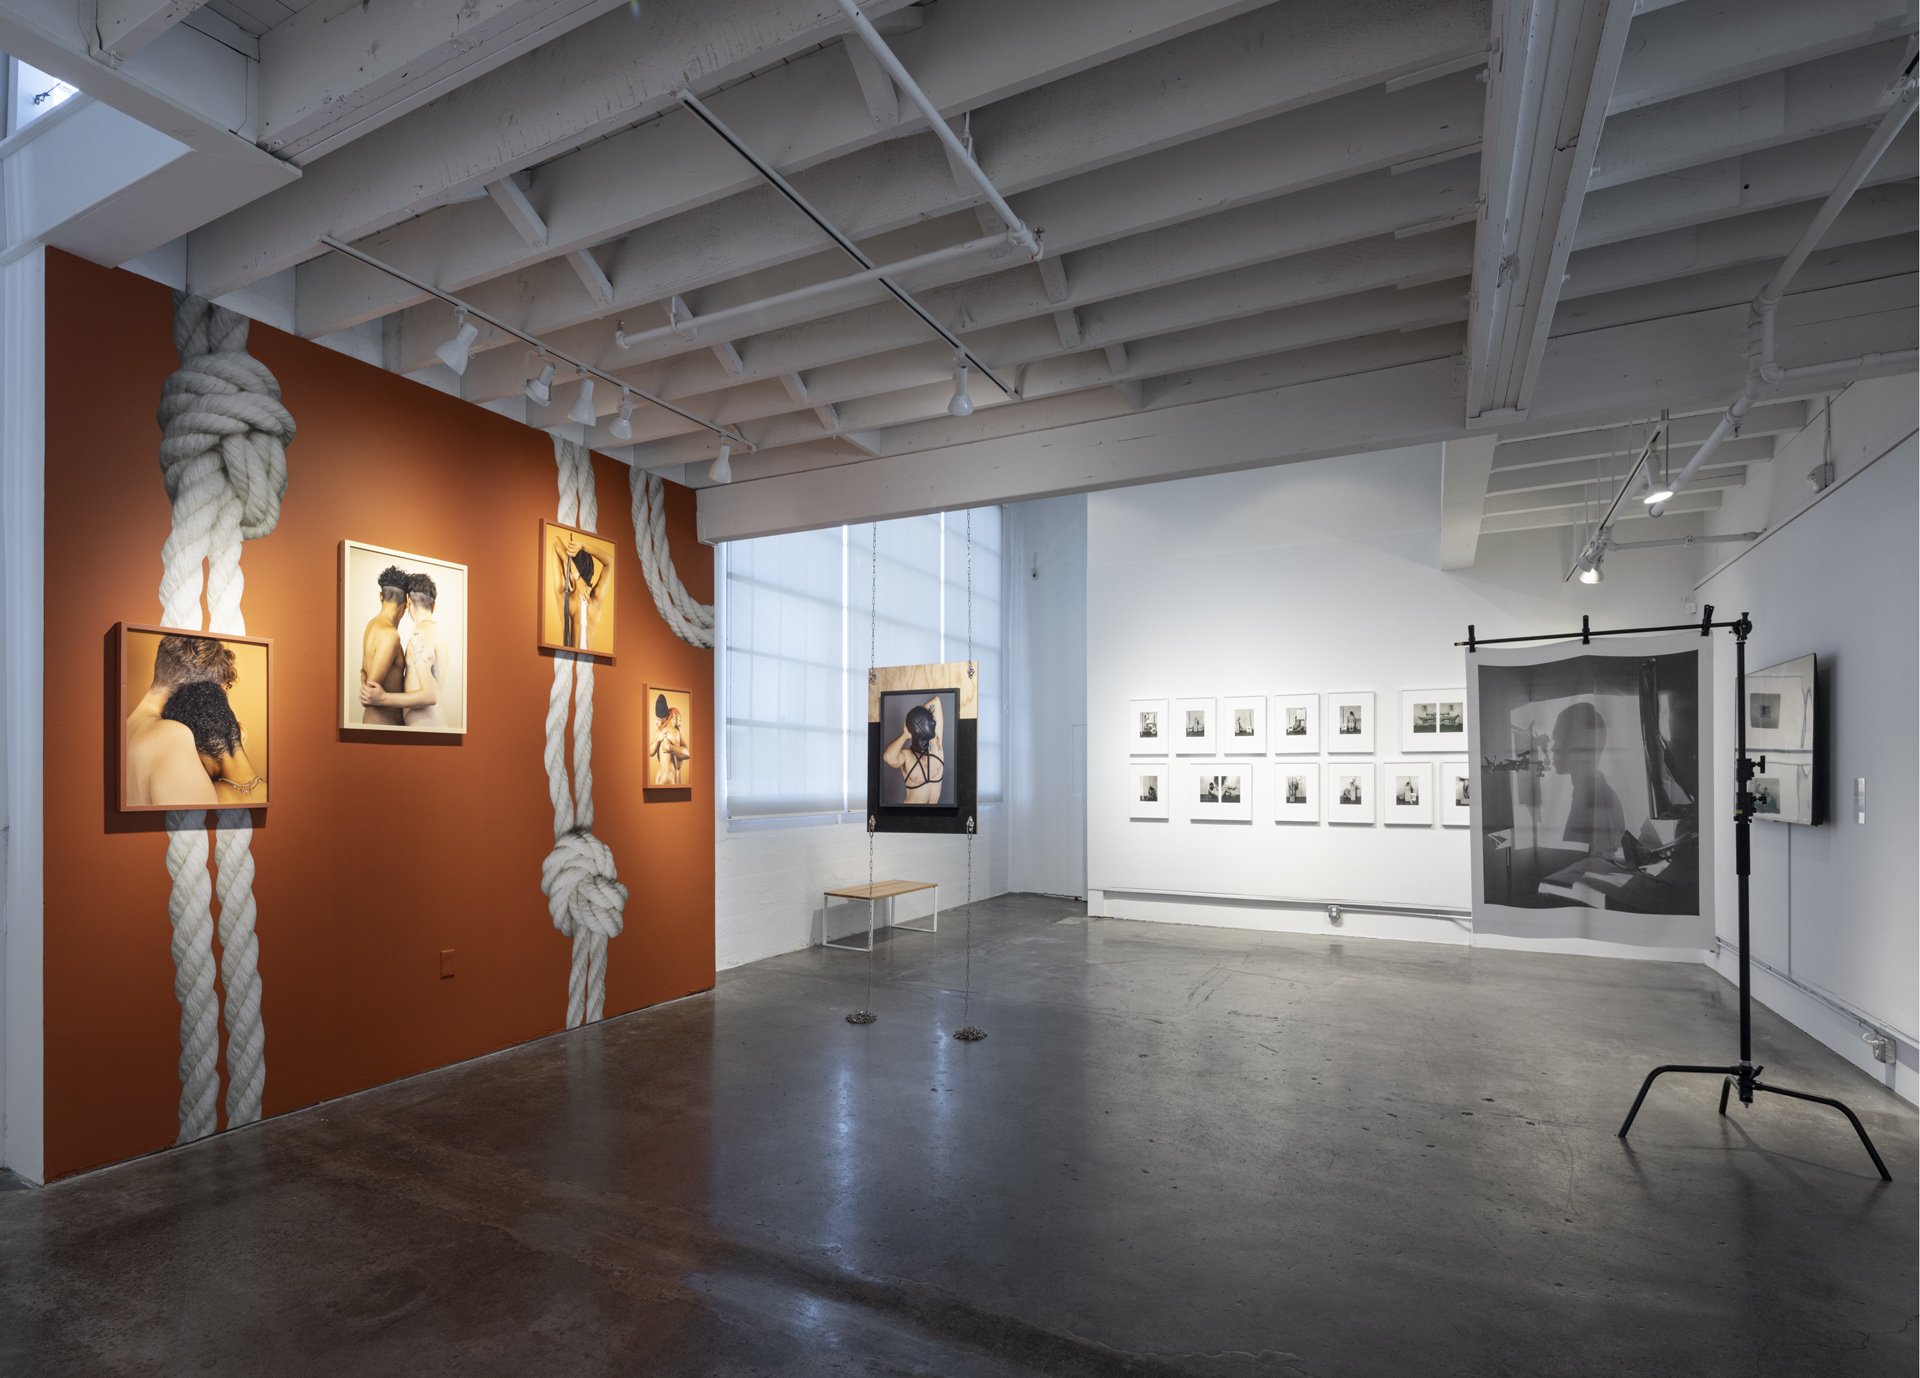  Installation view of Dismantling Monoliths at SF Camerawork. Photographs by Henrik Kam. 